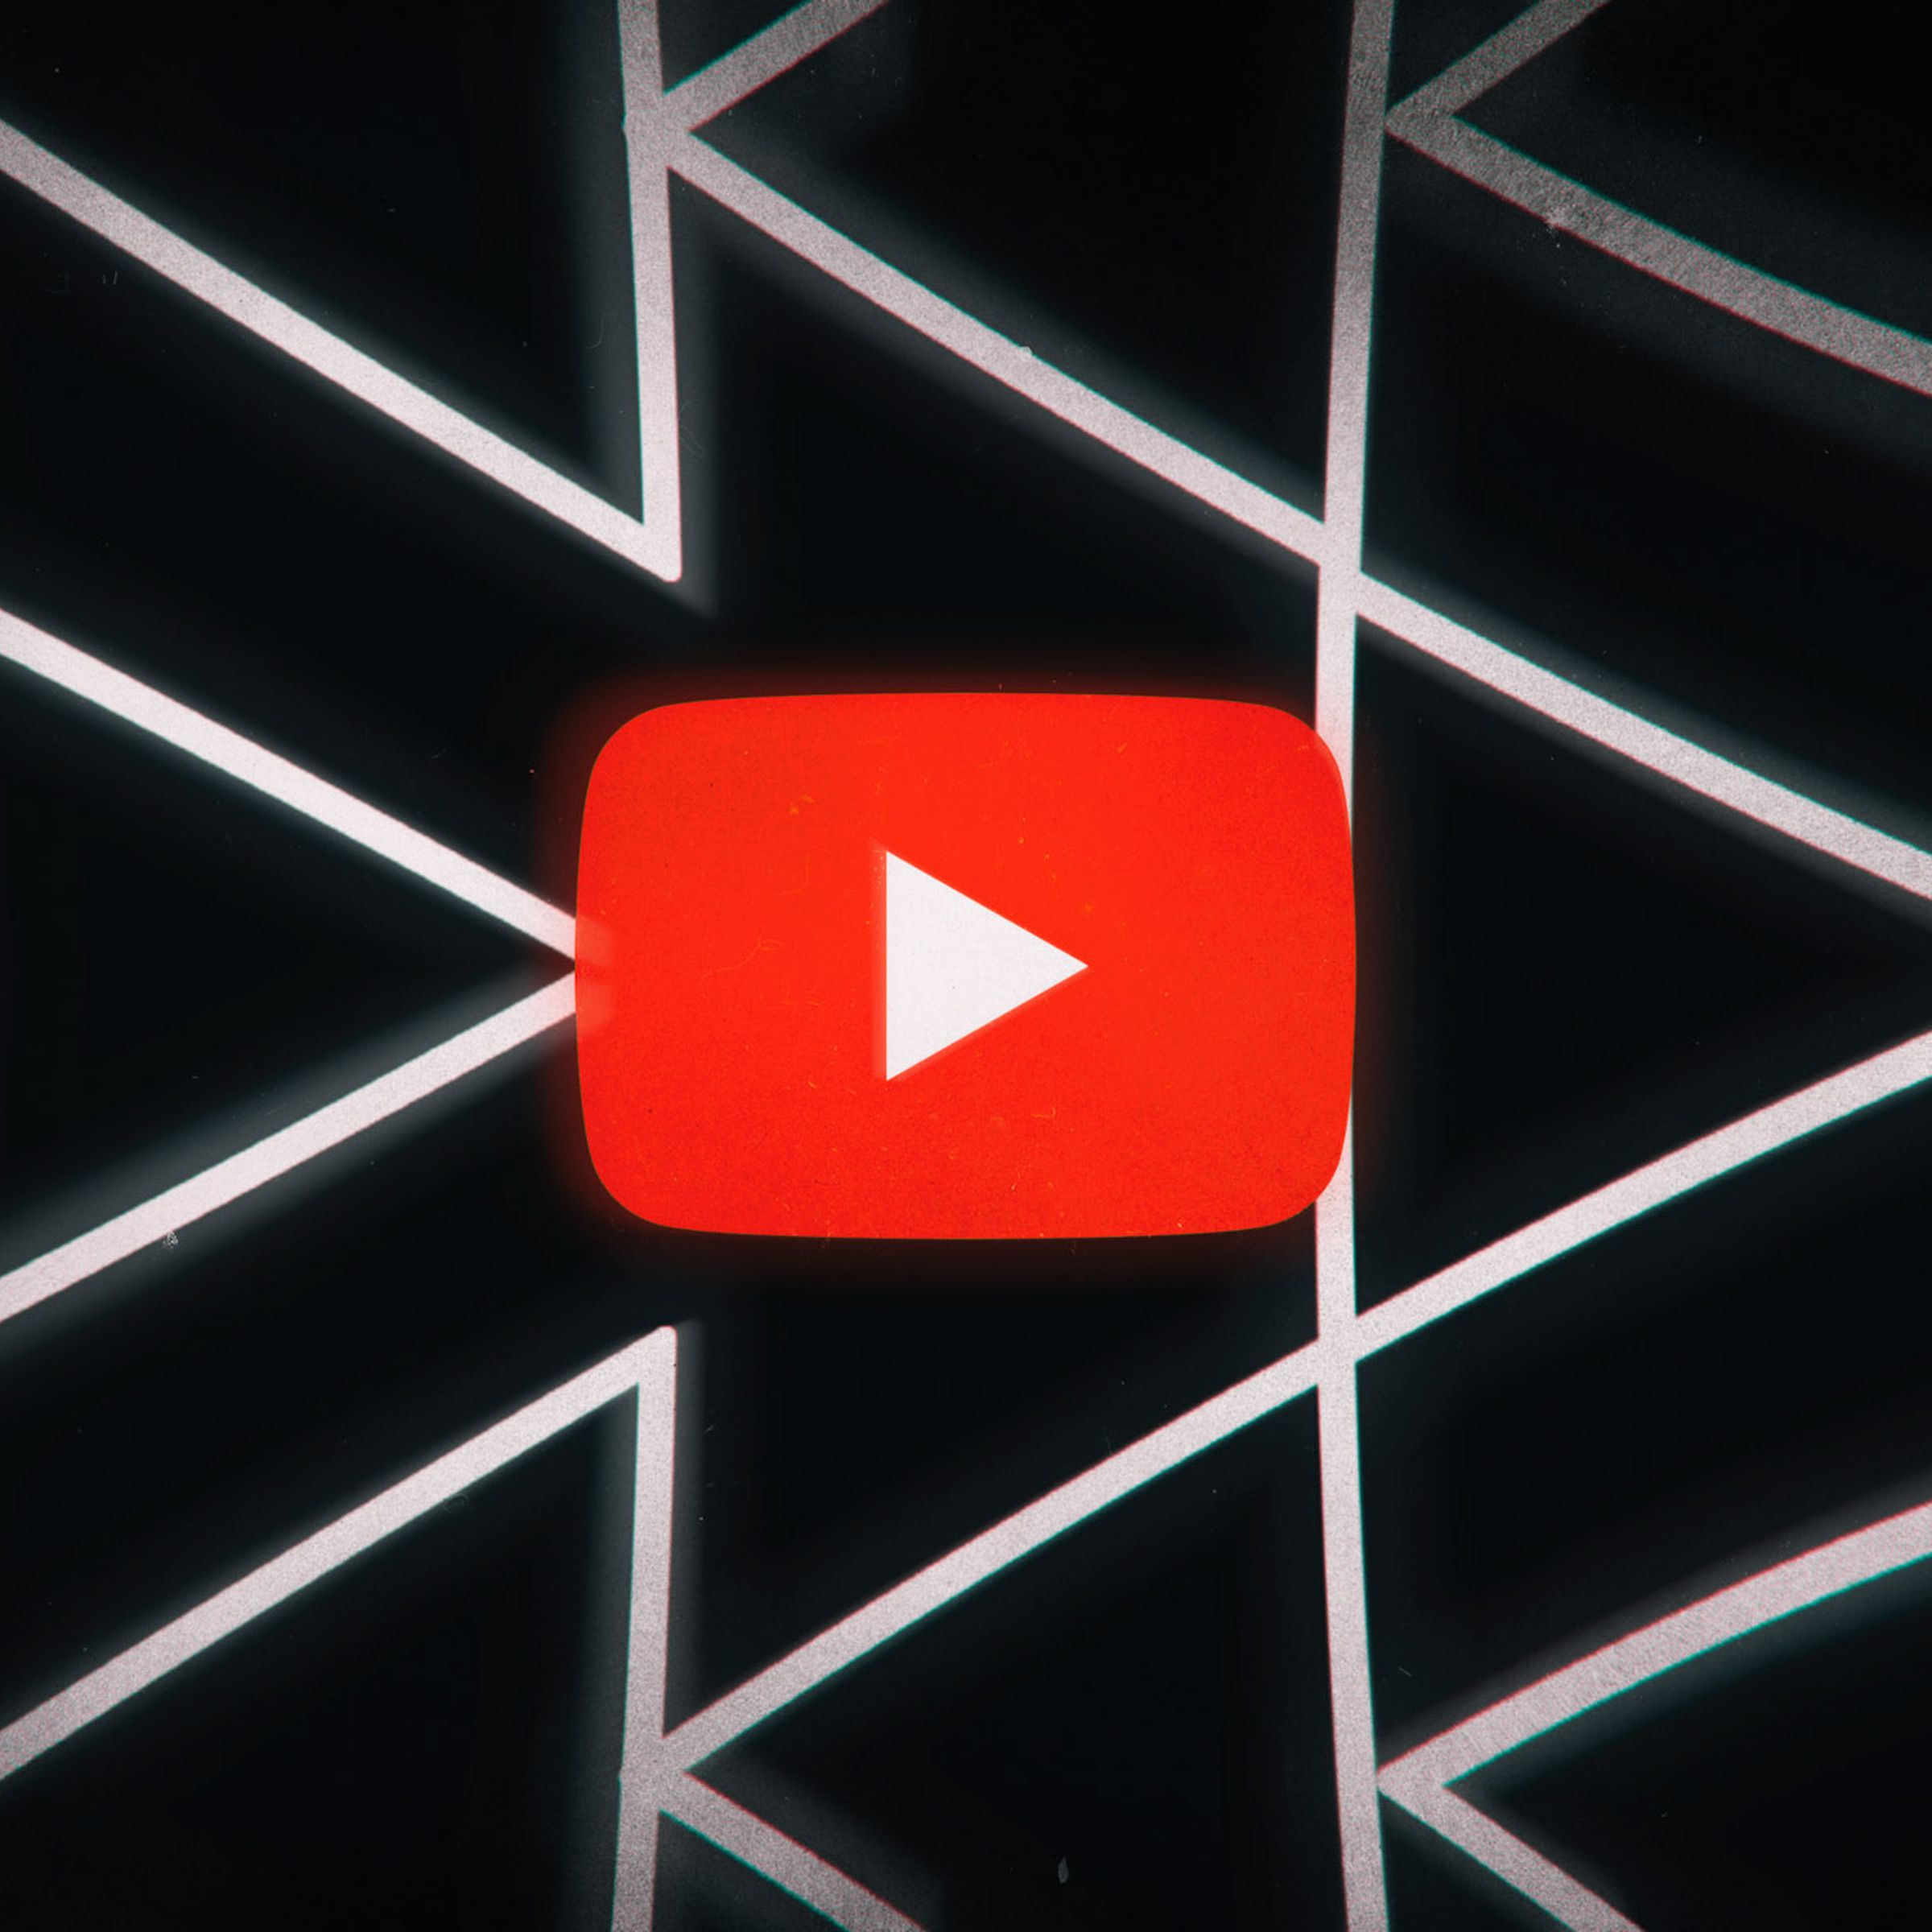 The YouTube logo on a black background